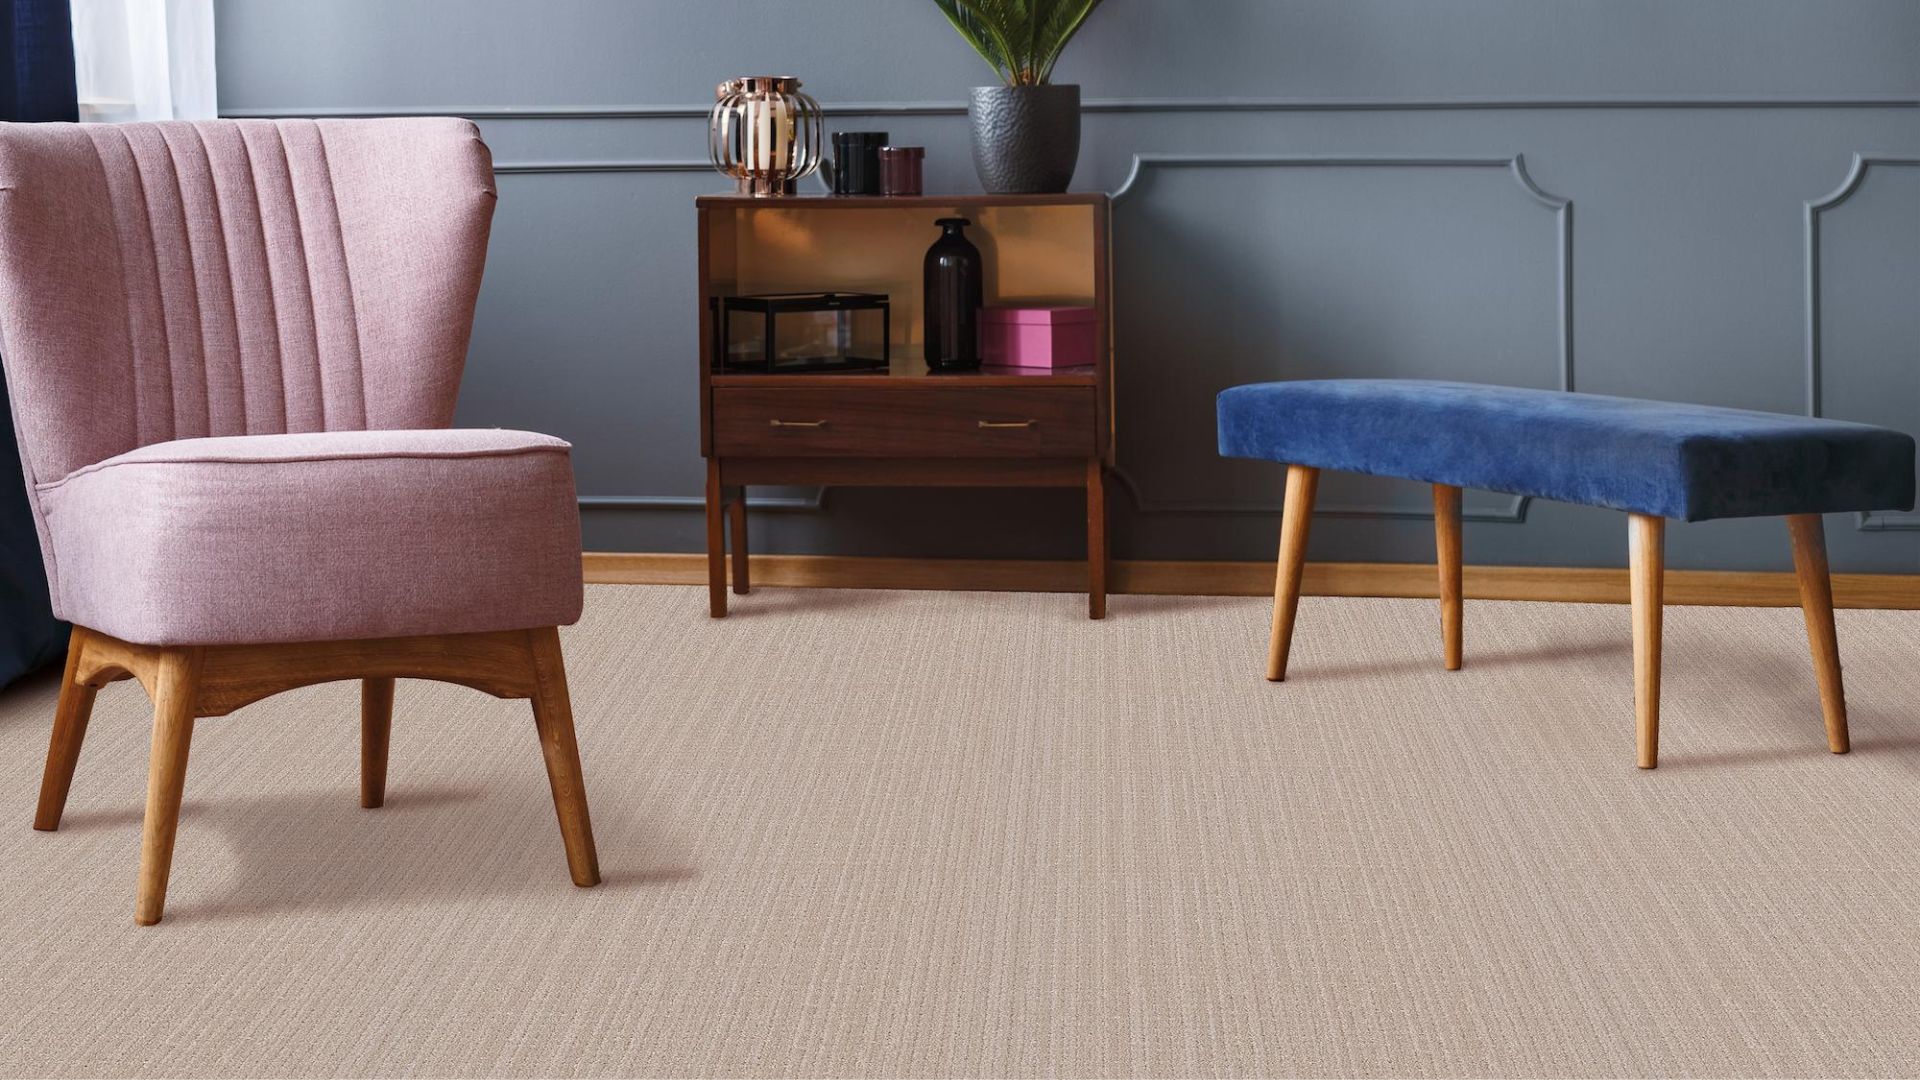 beige textured carpets in a stylish living room with pink chair and blue accent wall